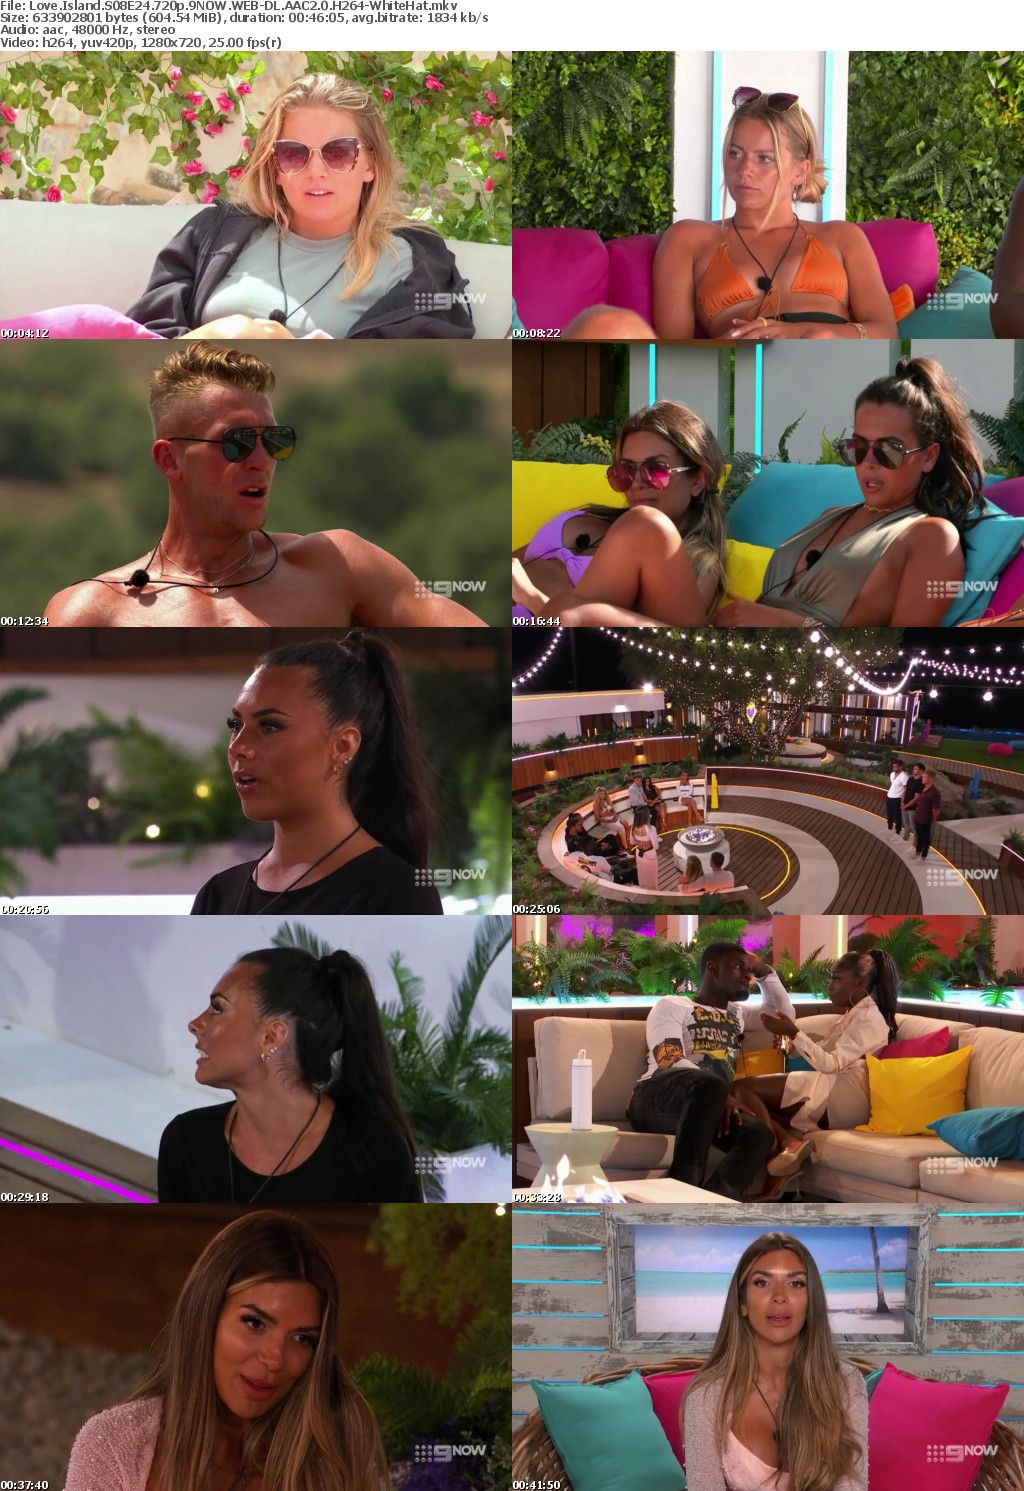 Love Island S08E24 720p 9NOW WEB-DL AAC2 0 H264-WhiteHat